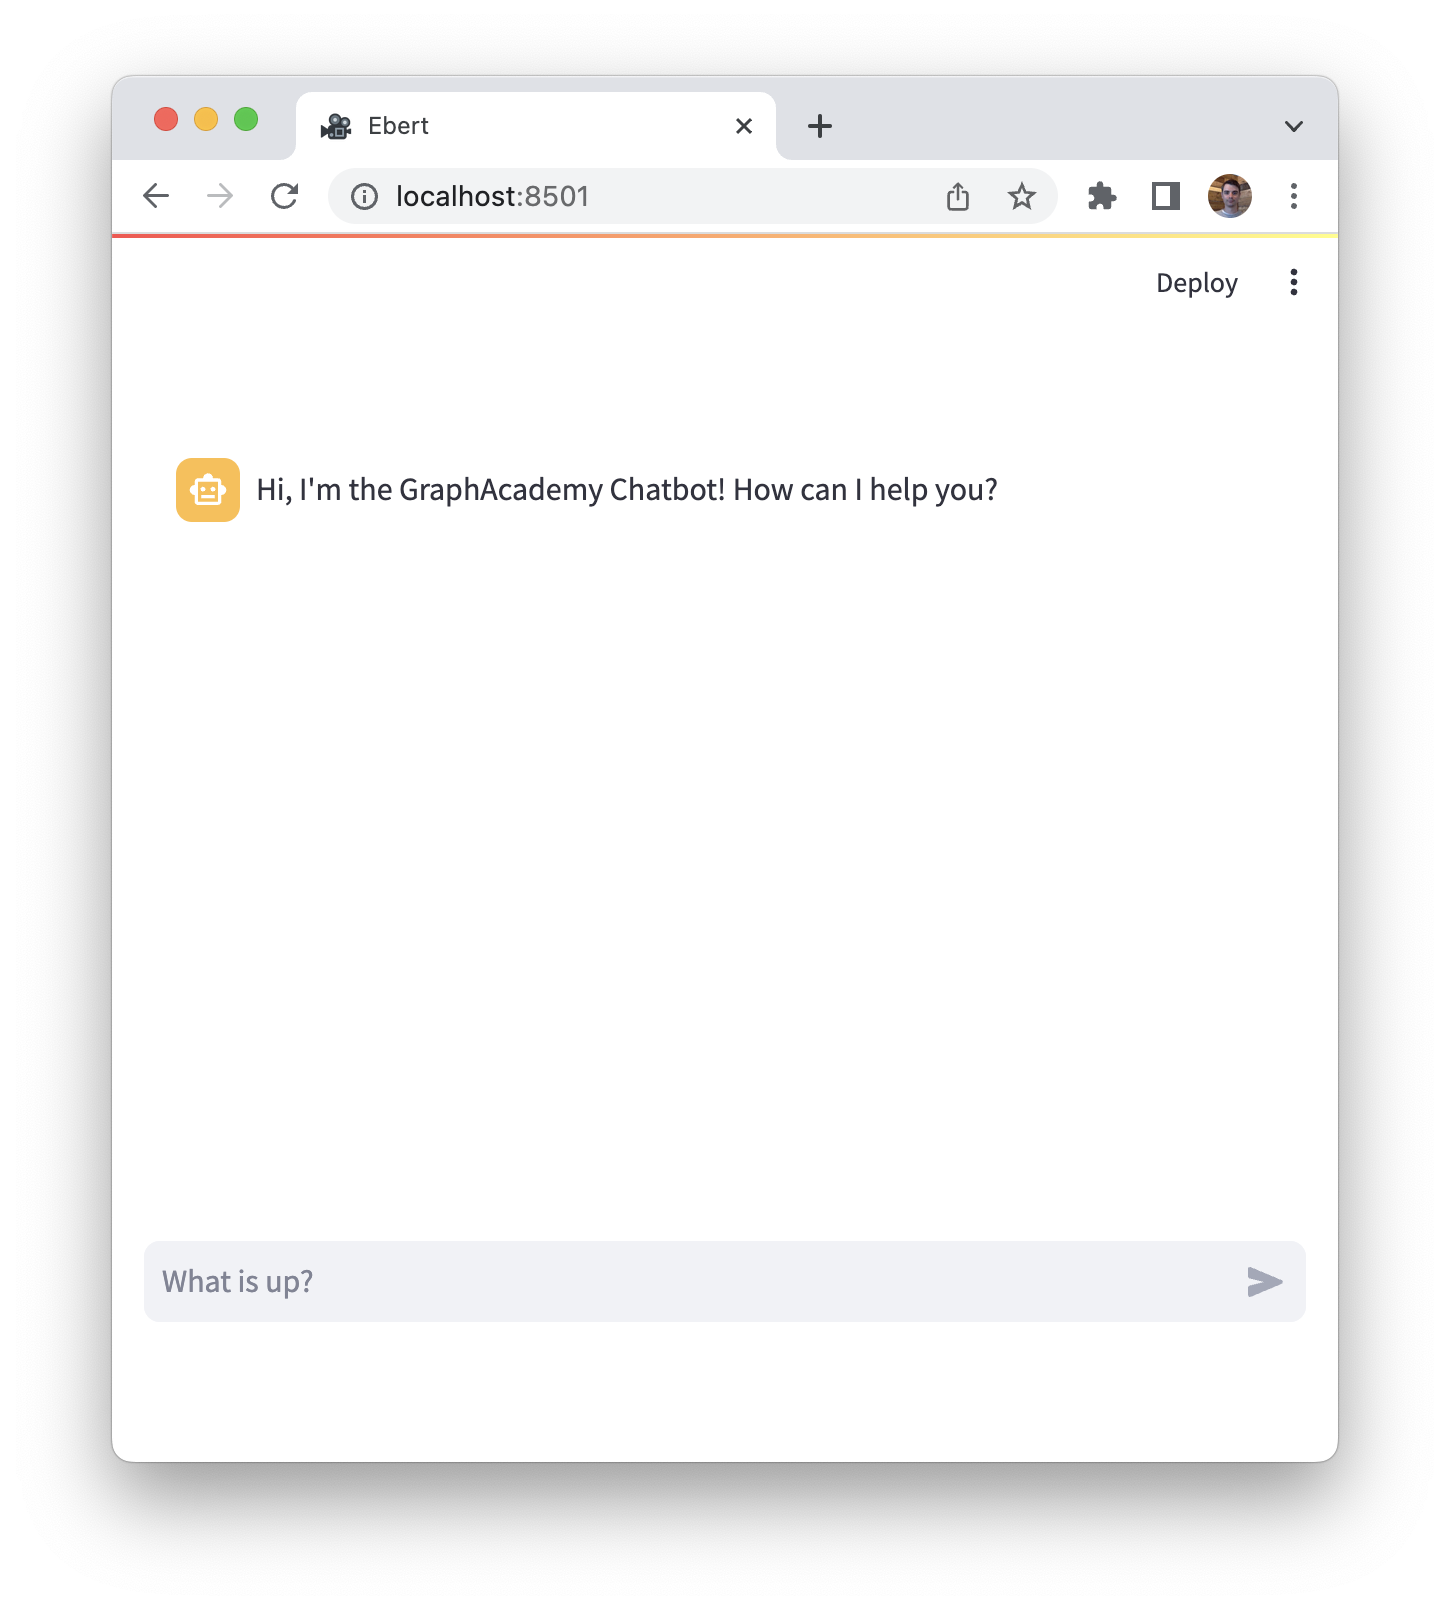 GraphAcademy Chatbot App Interface with an introductory message from the assistant and a box to send a message.